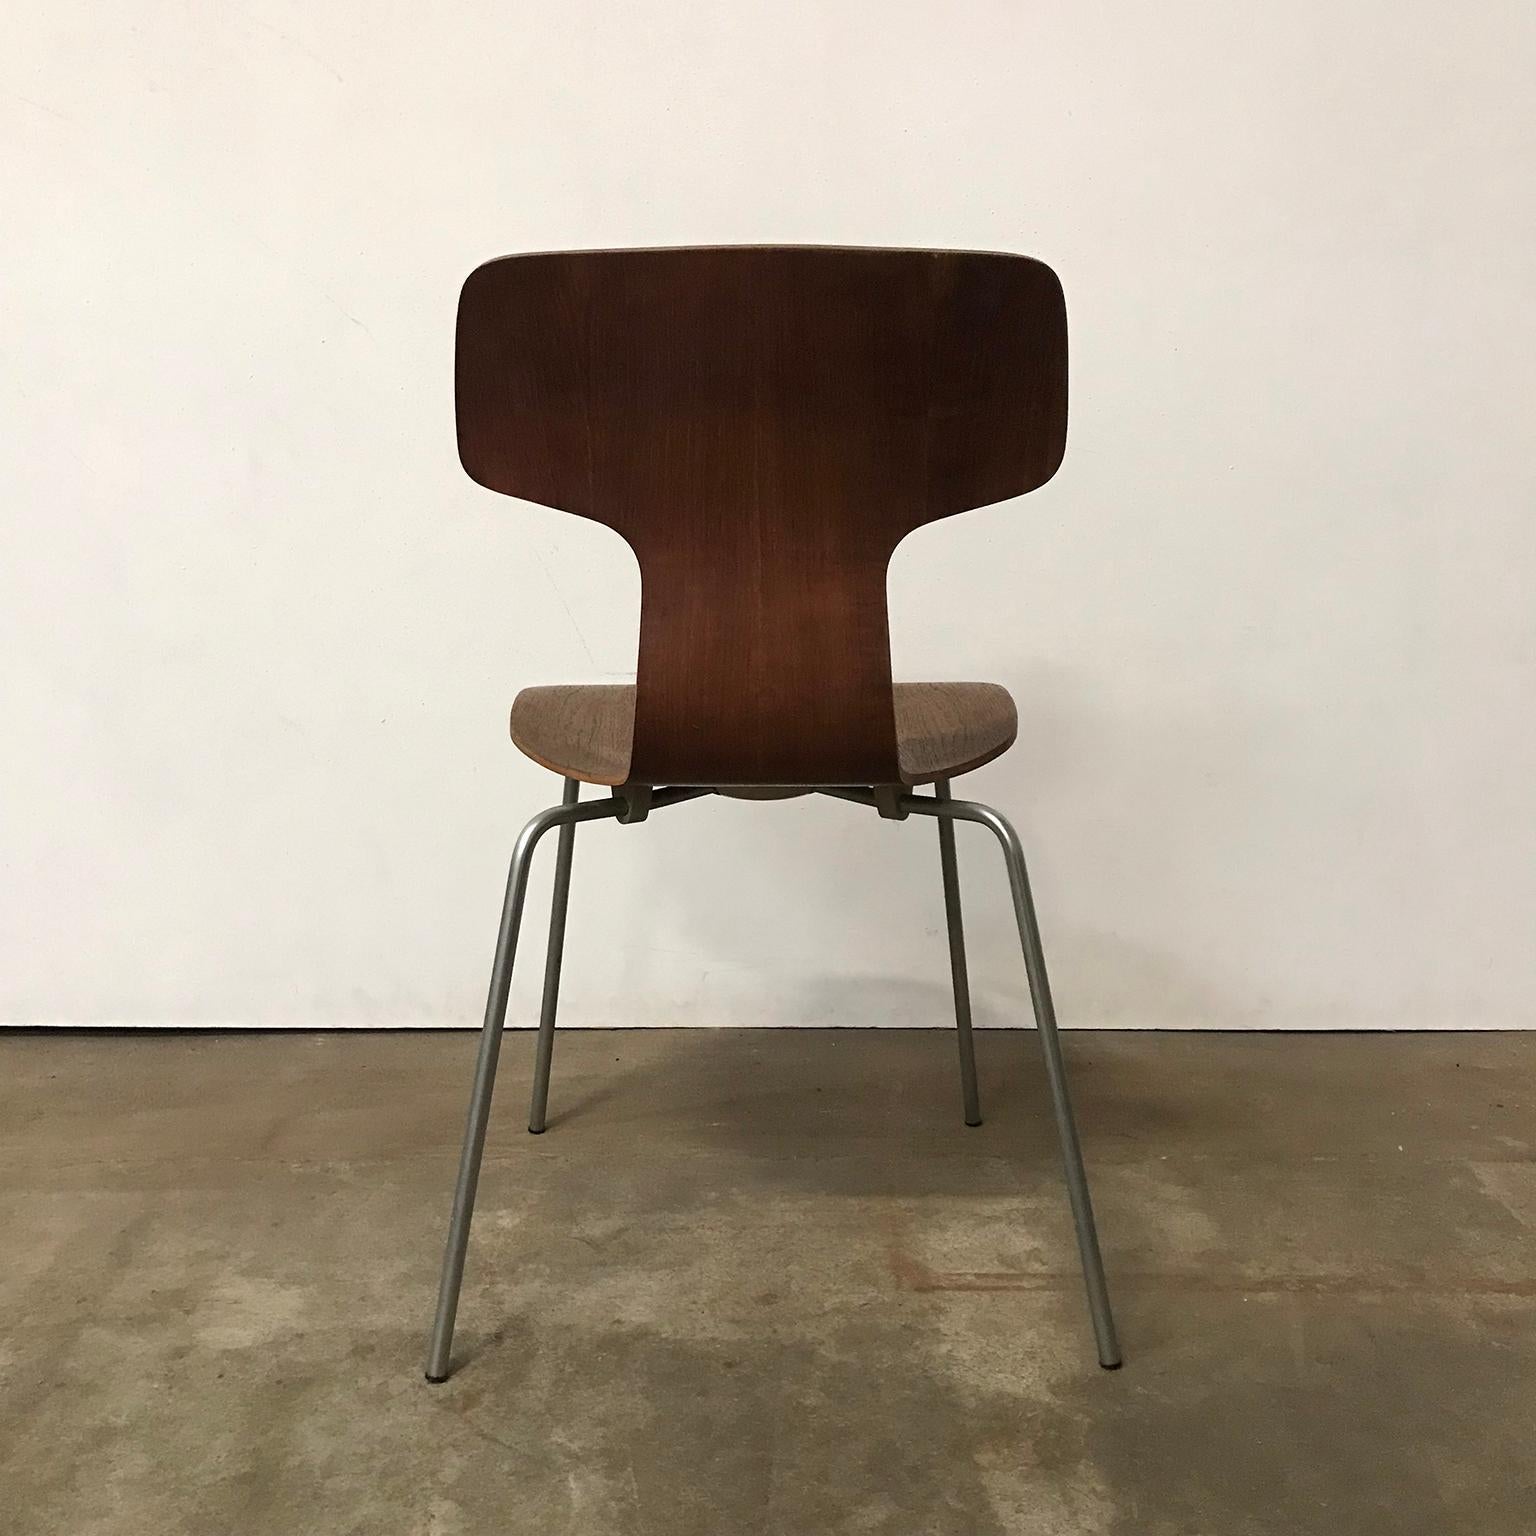 Mid-20th Century 1955, Arne Jacobsen for Fritz Hansen, Original, Rare, Chair 3103 with Grey Base For Sale